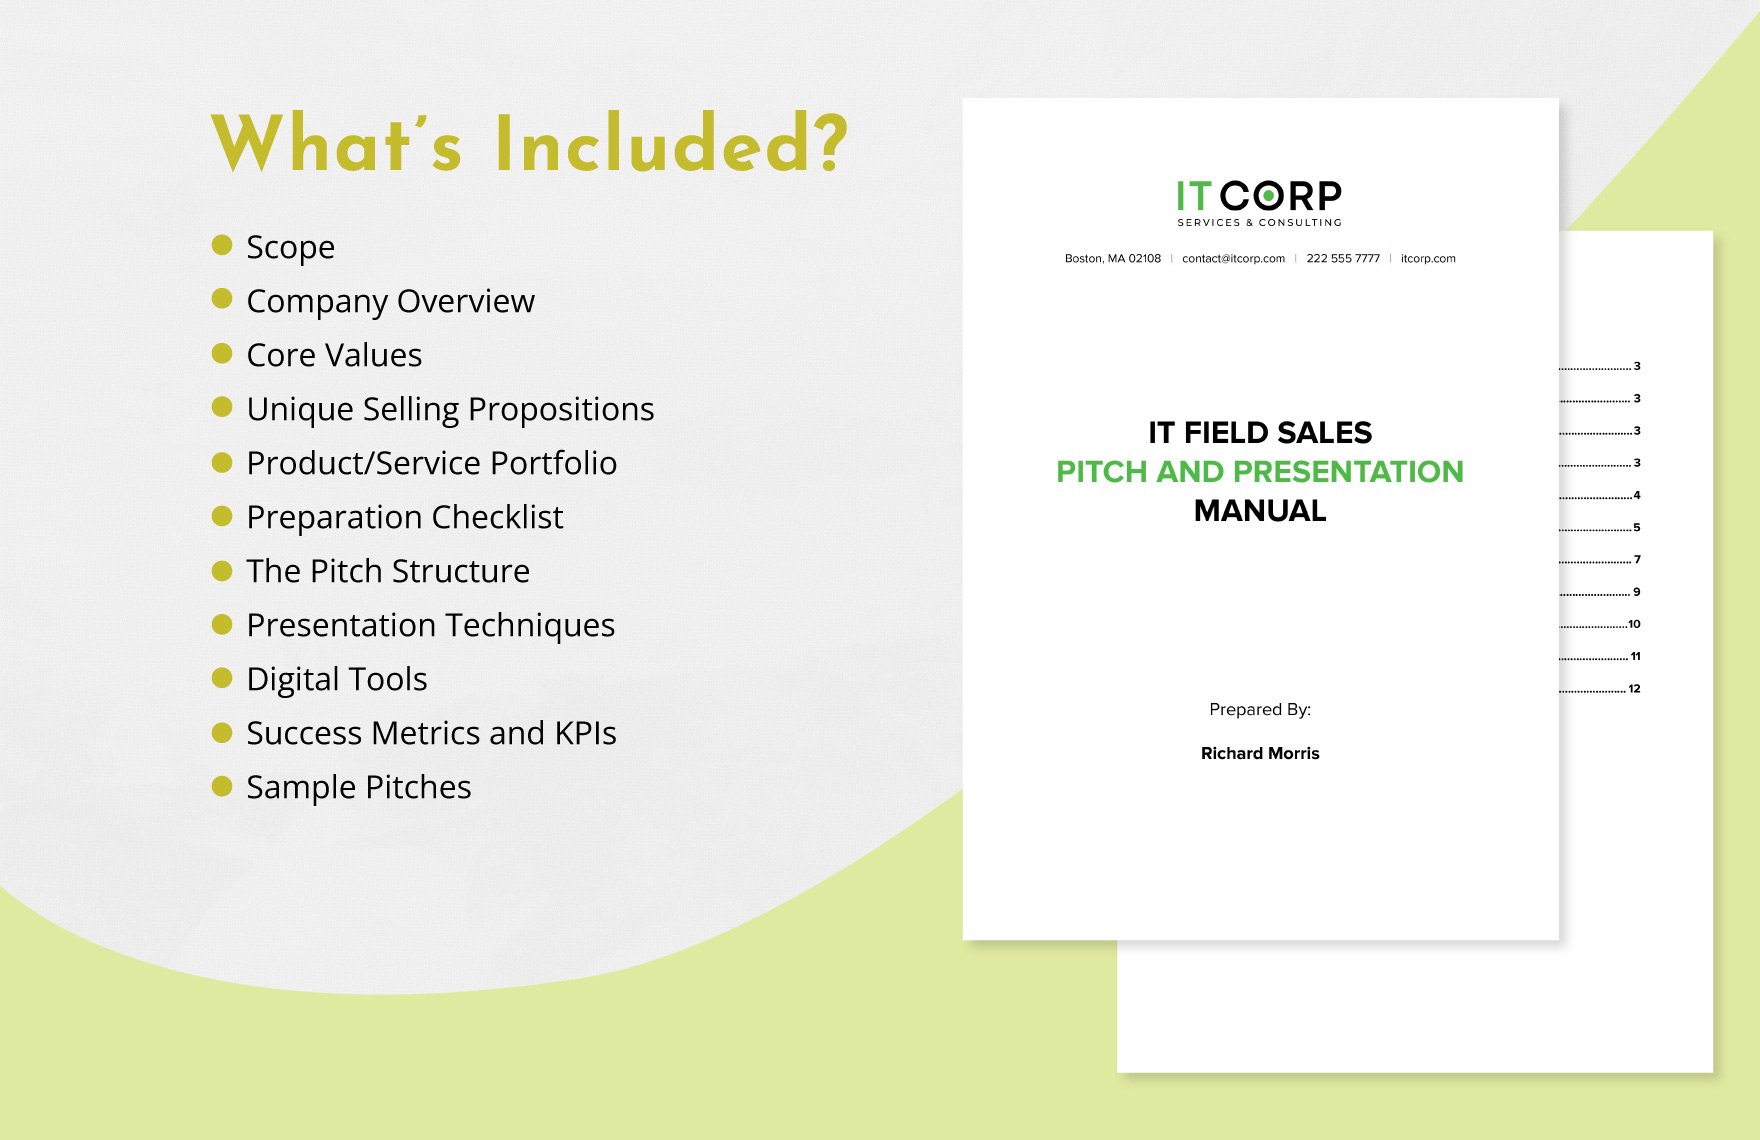 IT Field Sales Pitch and Presentation Manual Template